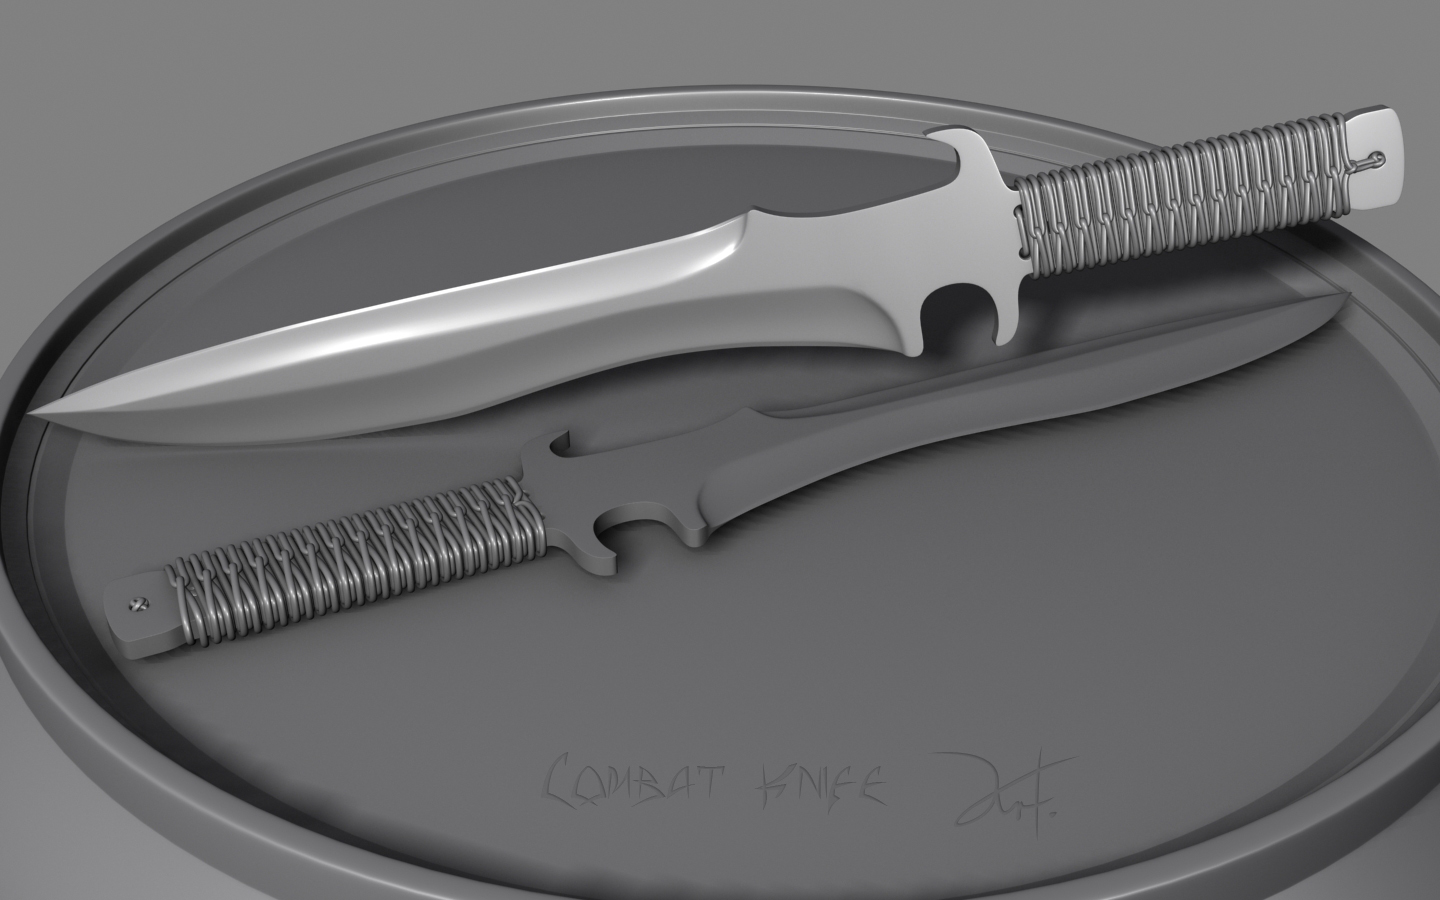 Combat Knife by The5 on DeviantArt